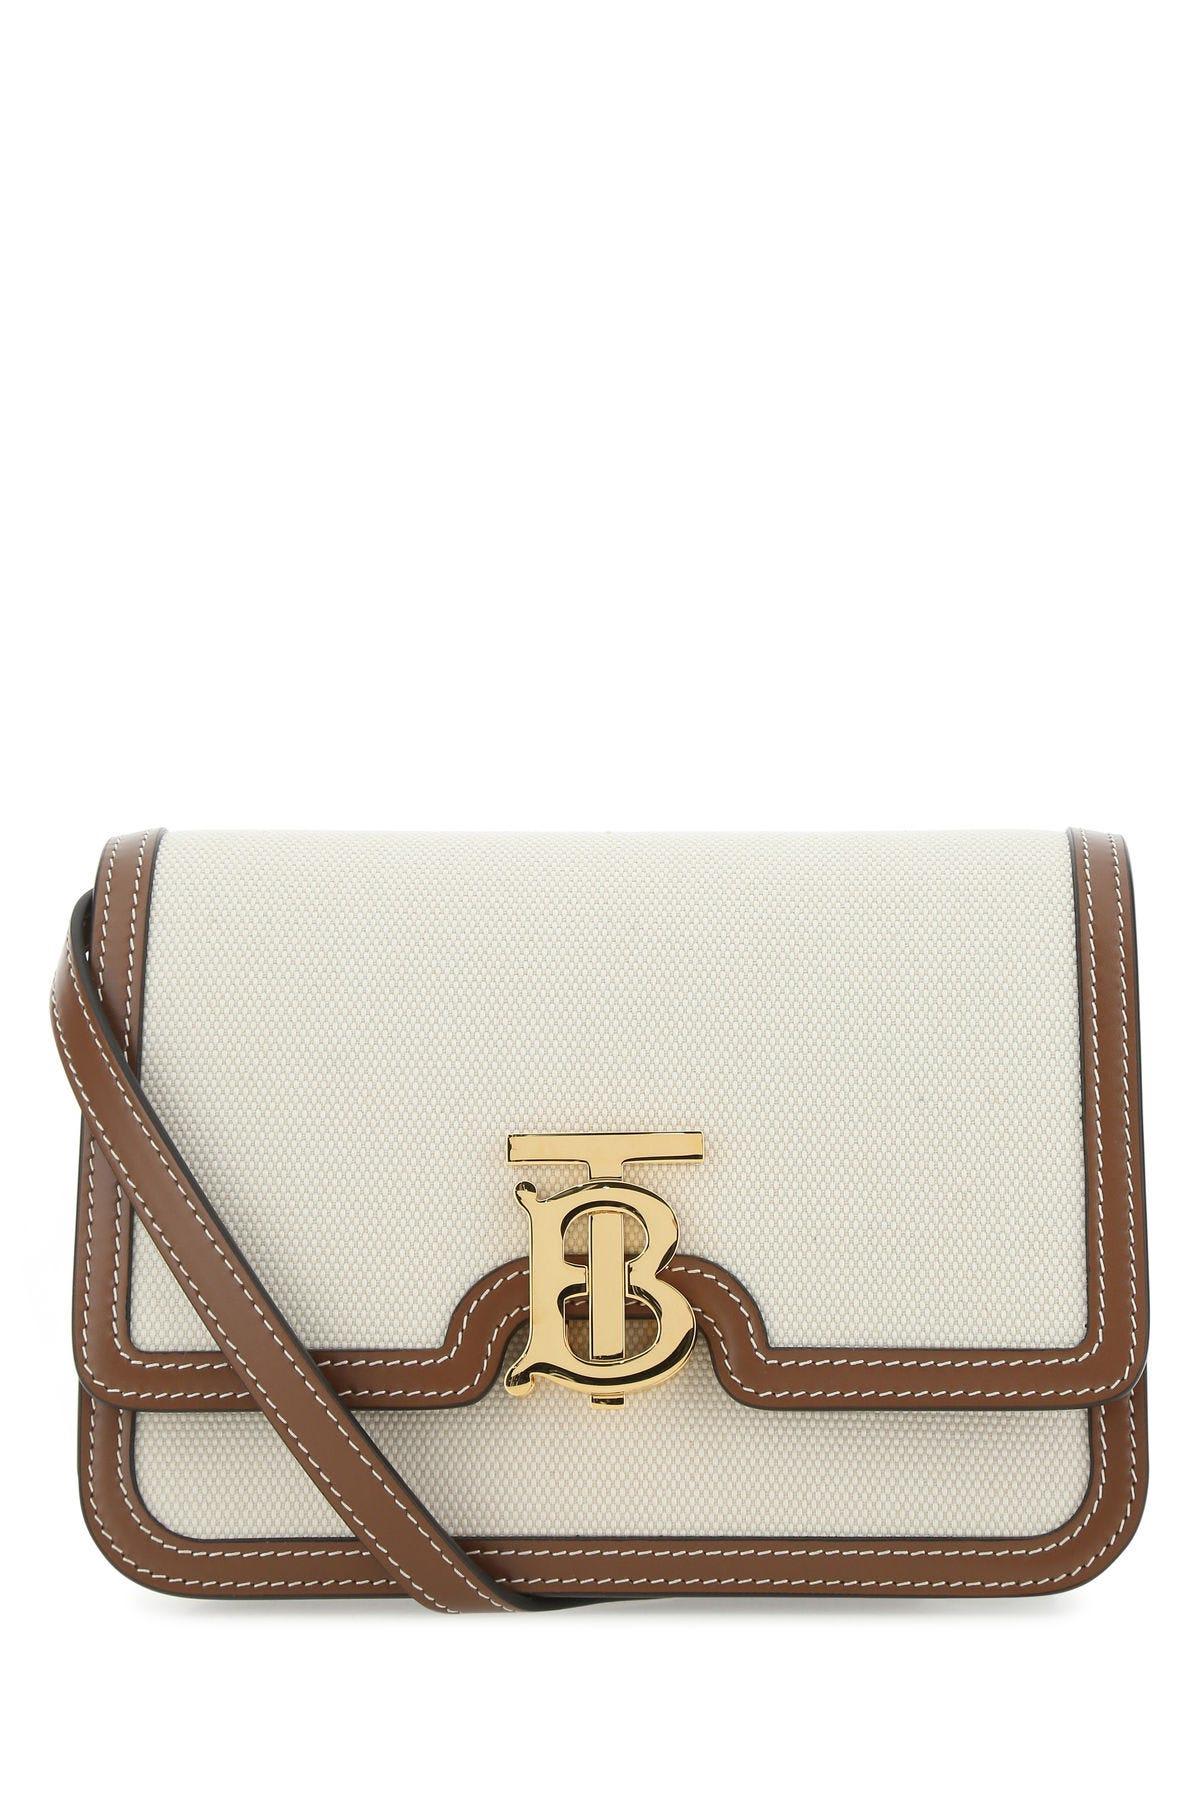 Burberry Two-tone Canvas And Leather Tb Crossbody Bag